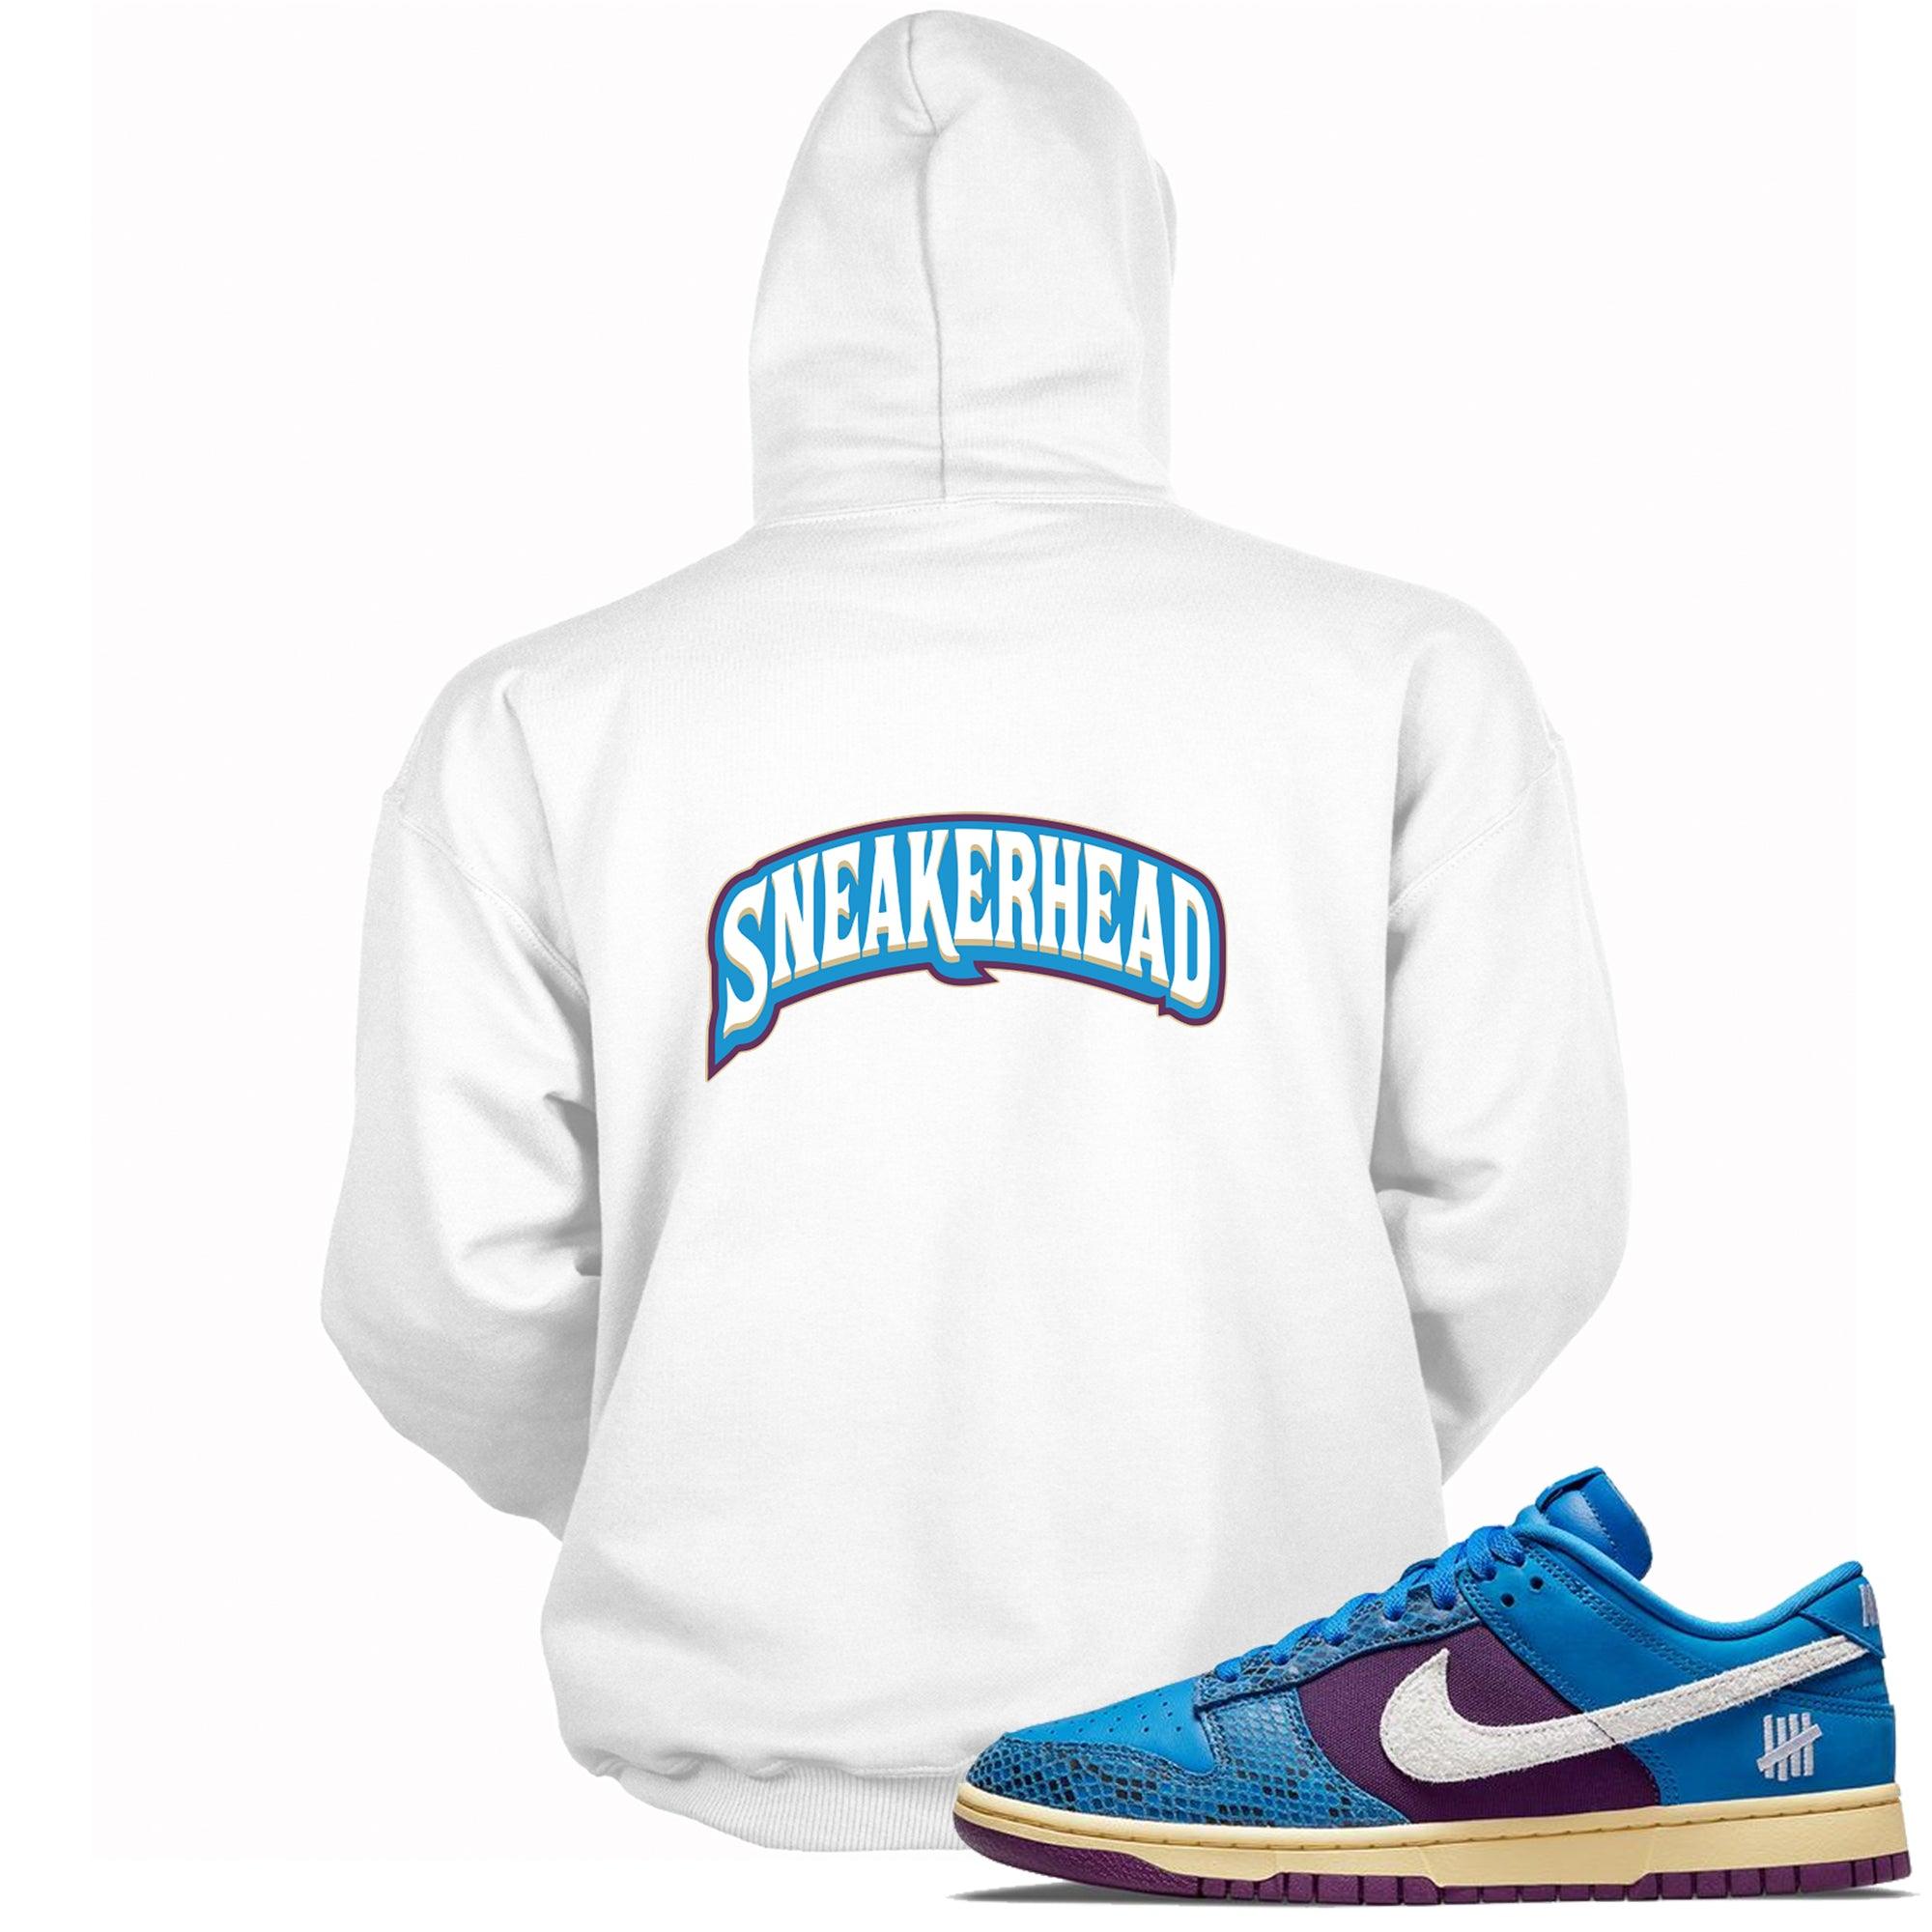 Sneakerhead Hoodie Dunk Low Undefeated 5 On It Dunk vs AF1 photo